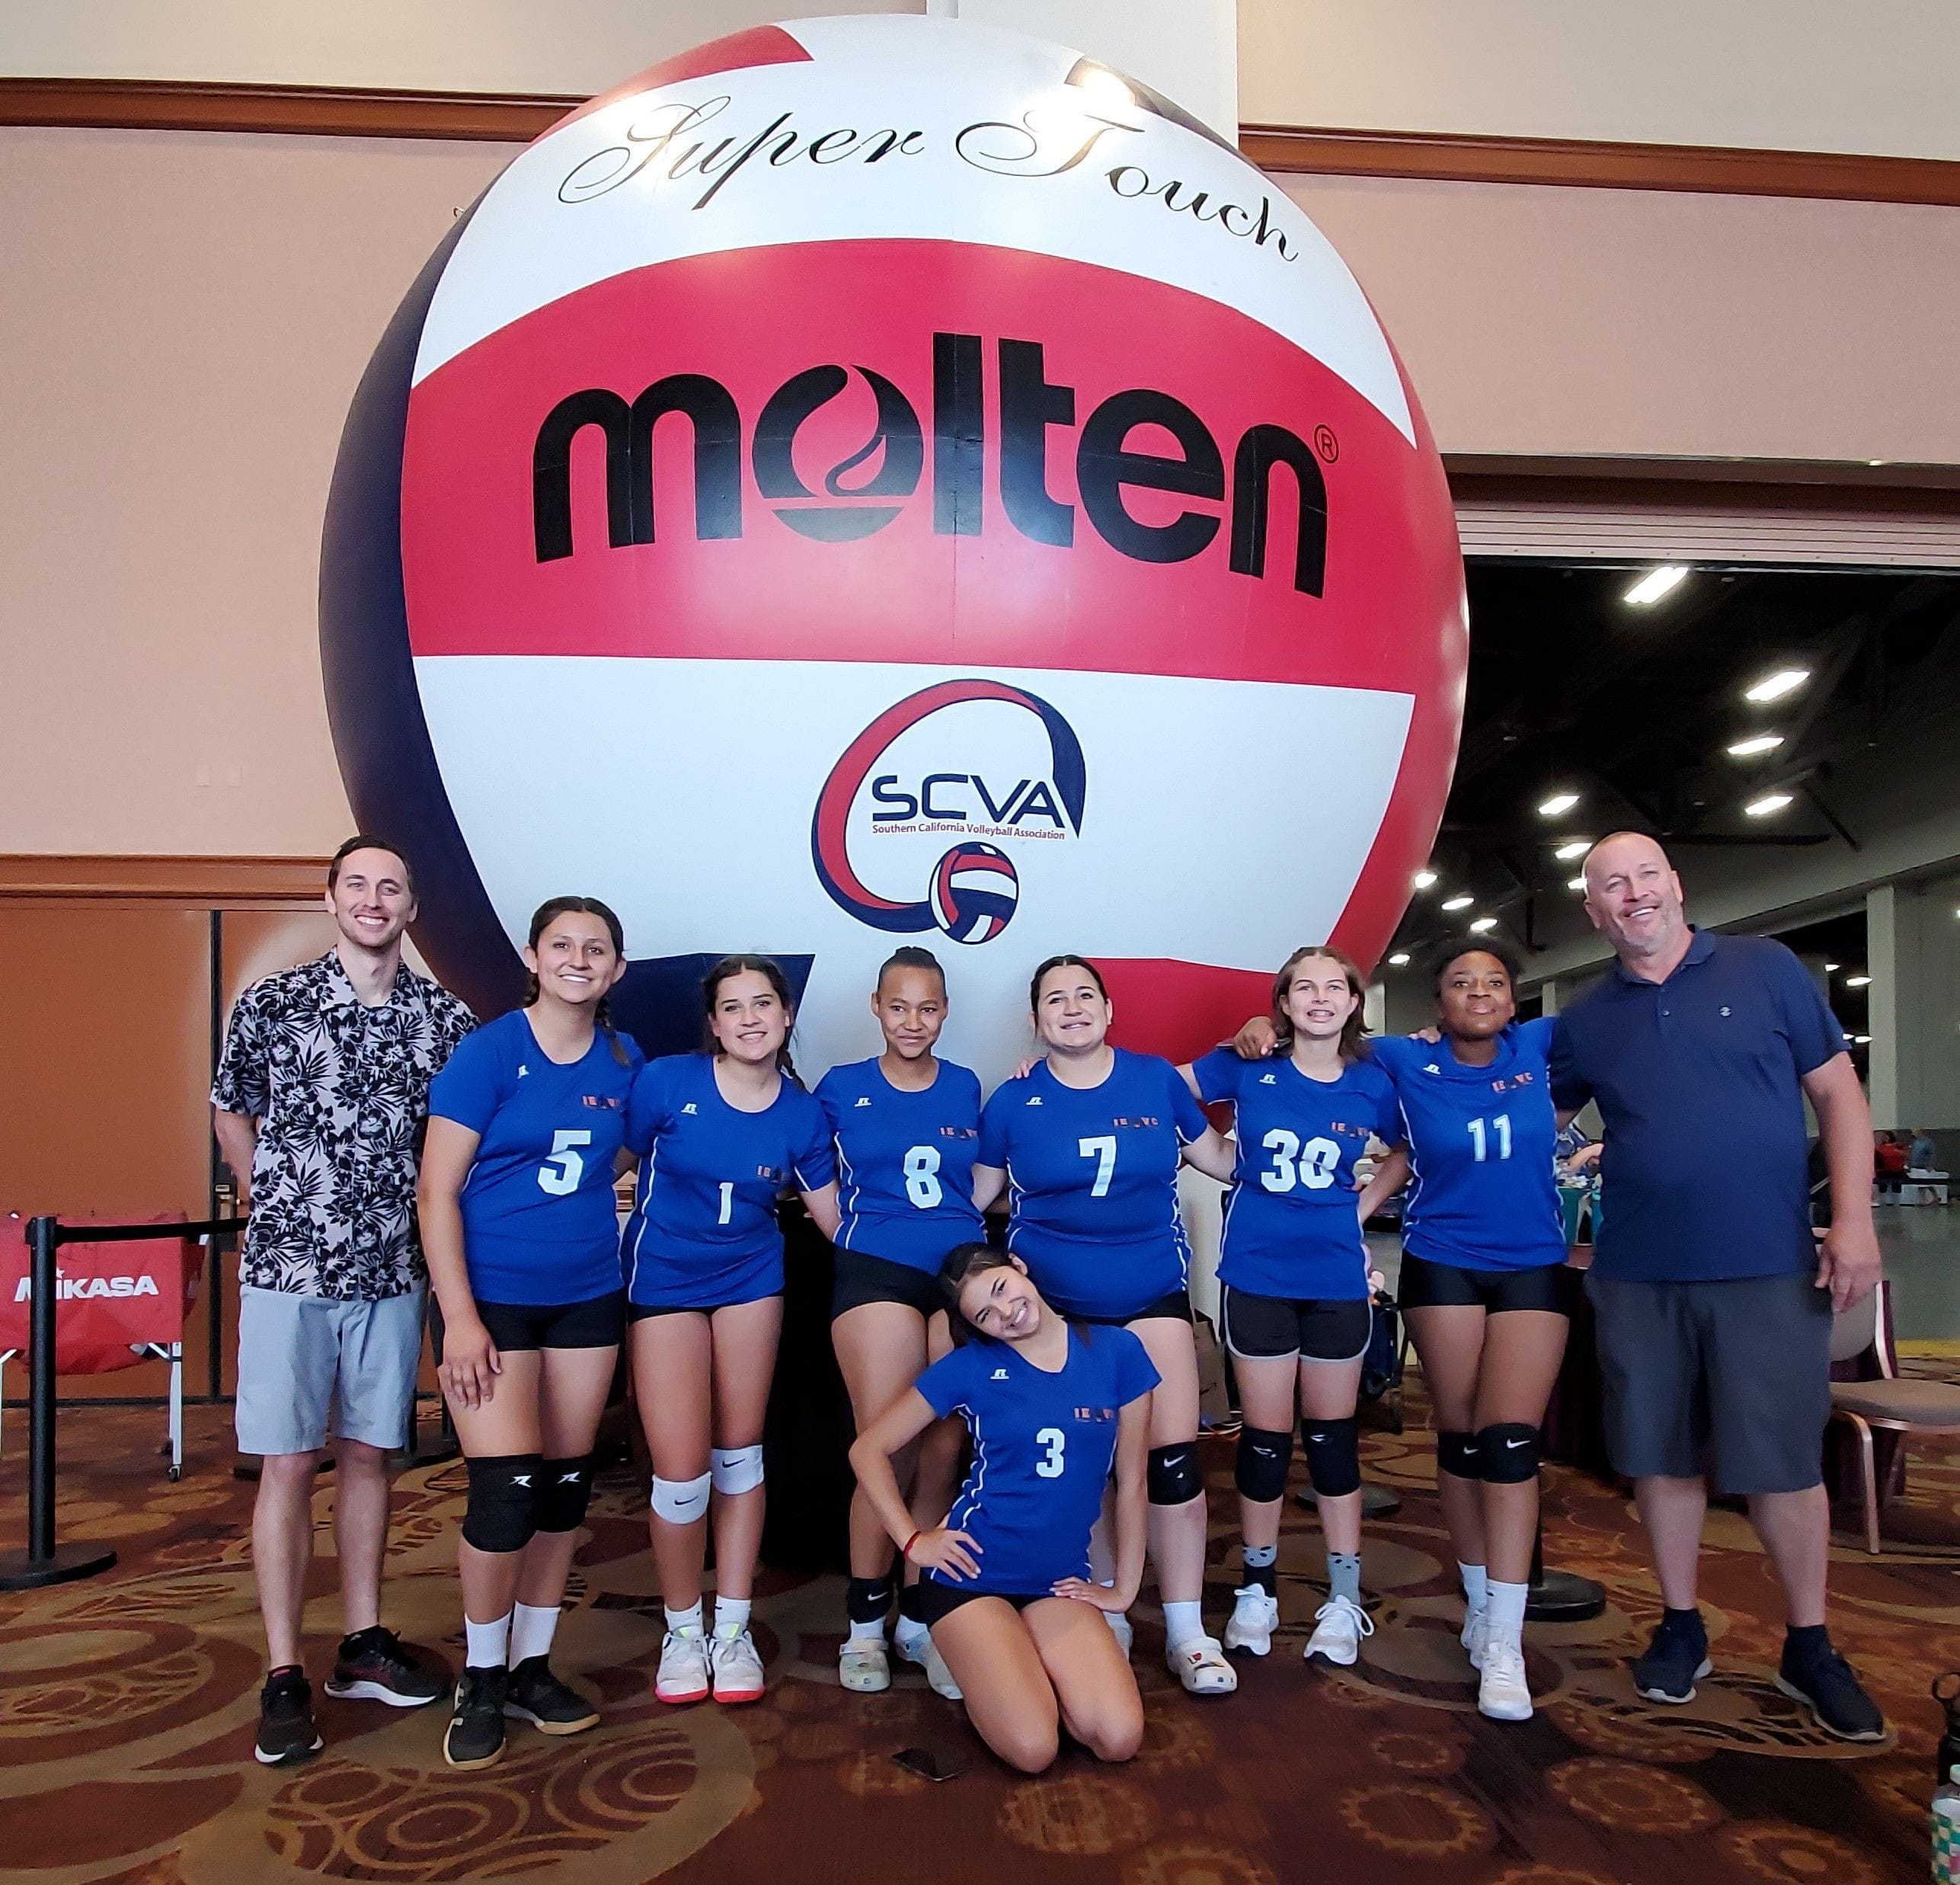 Club volleyball teams travel across Southern California and local states.